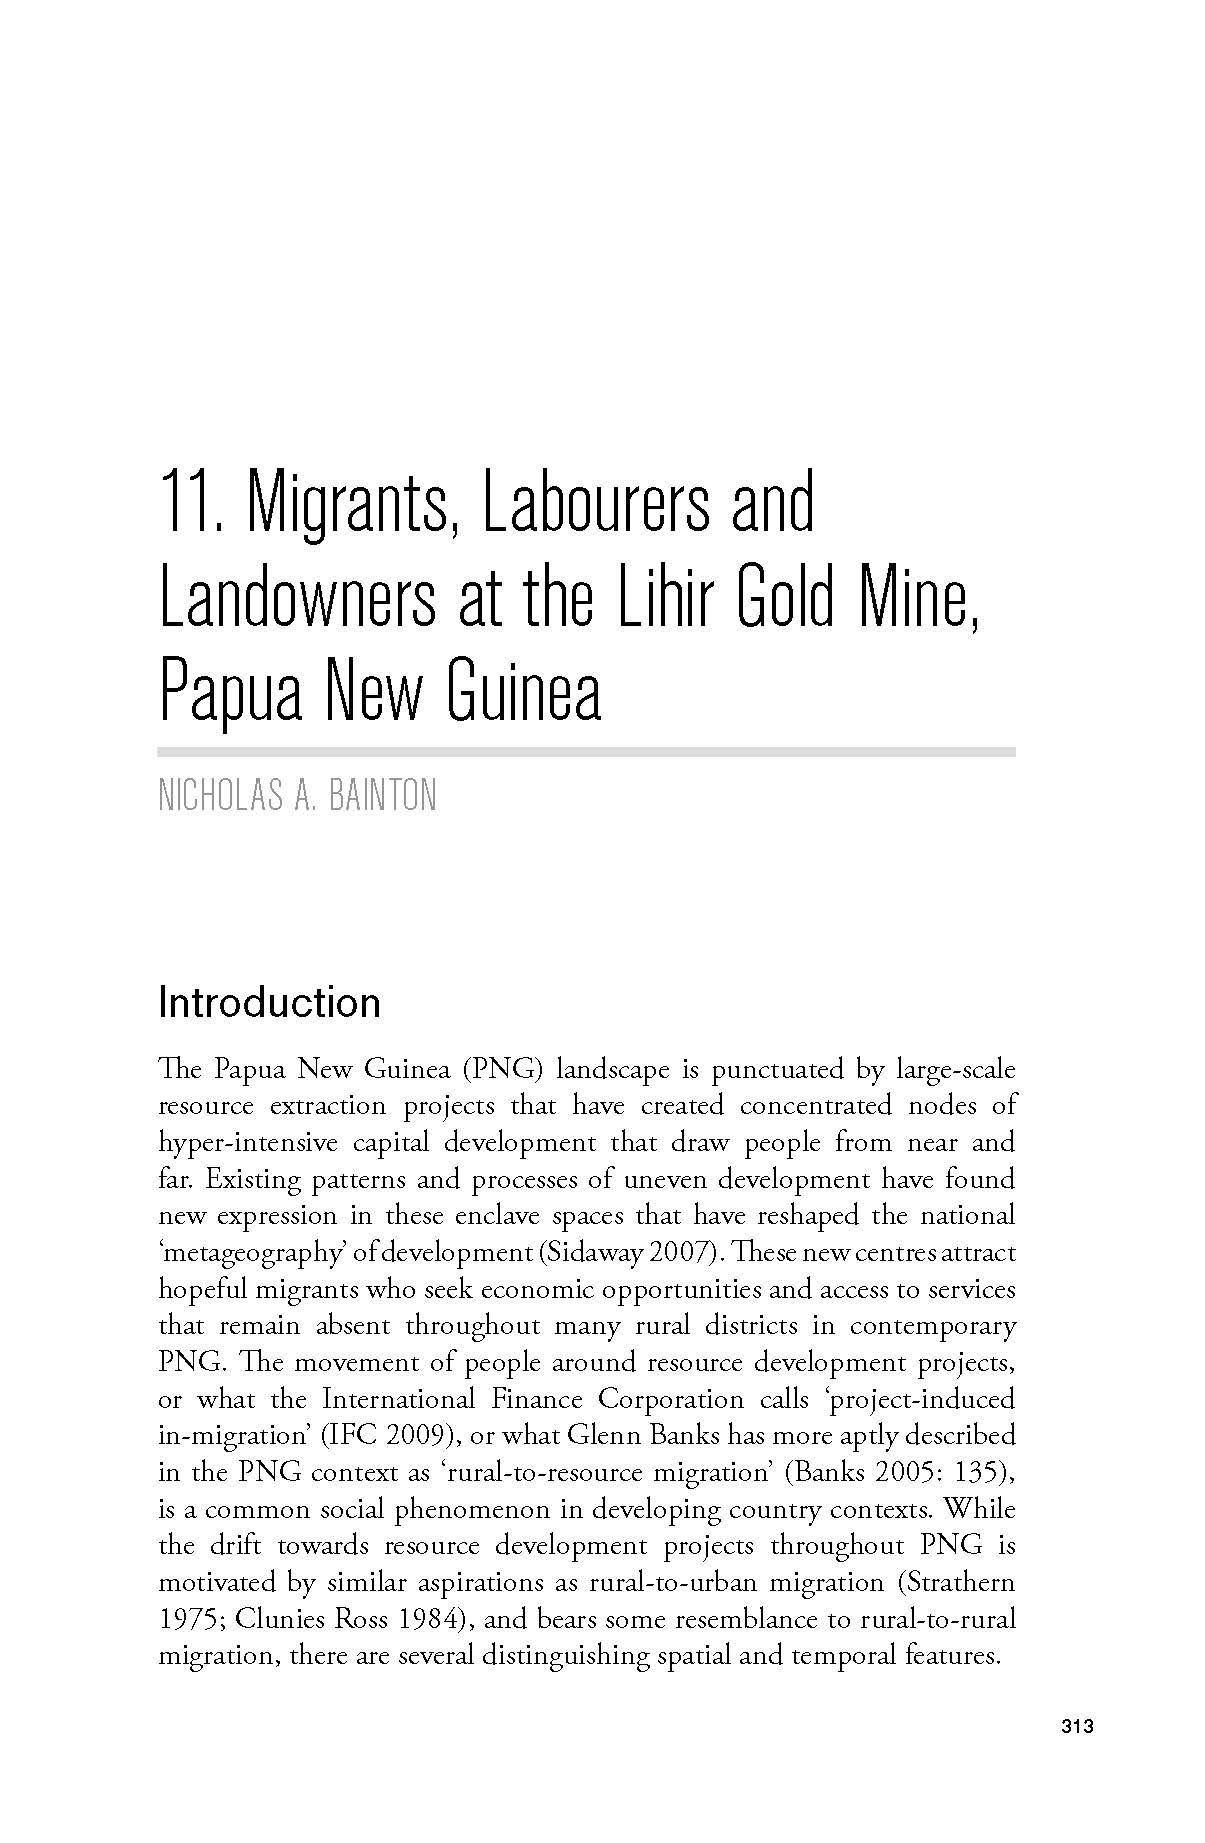 Migrants, labourers and landowners at the Lihir gold mine, Papua New Guinea